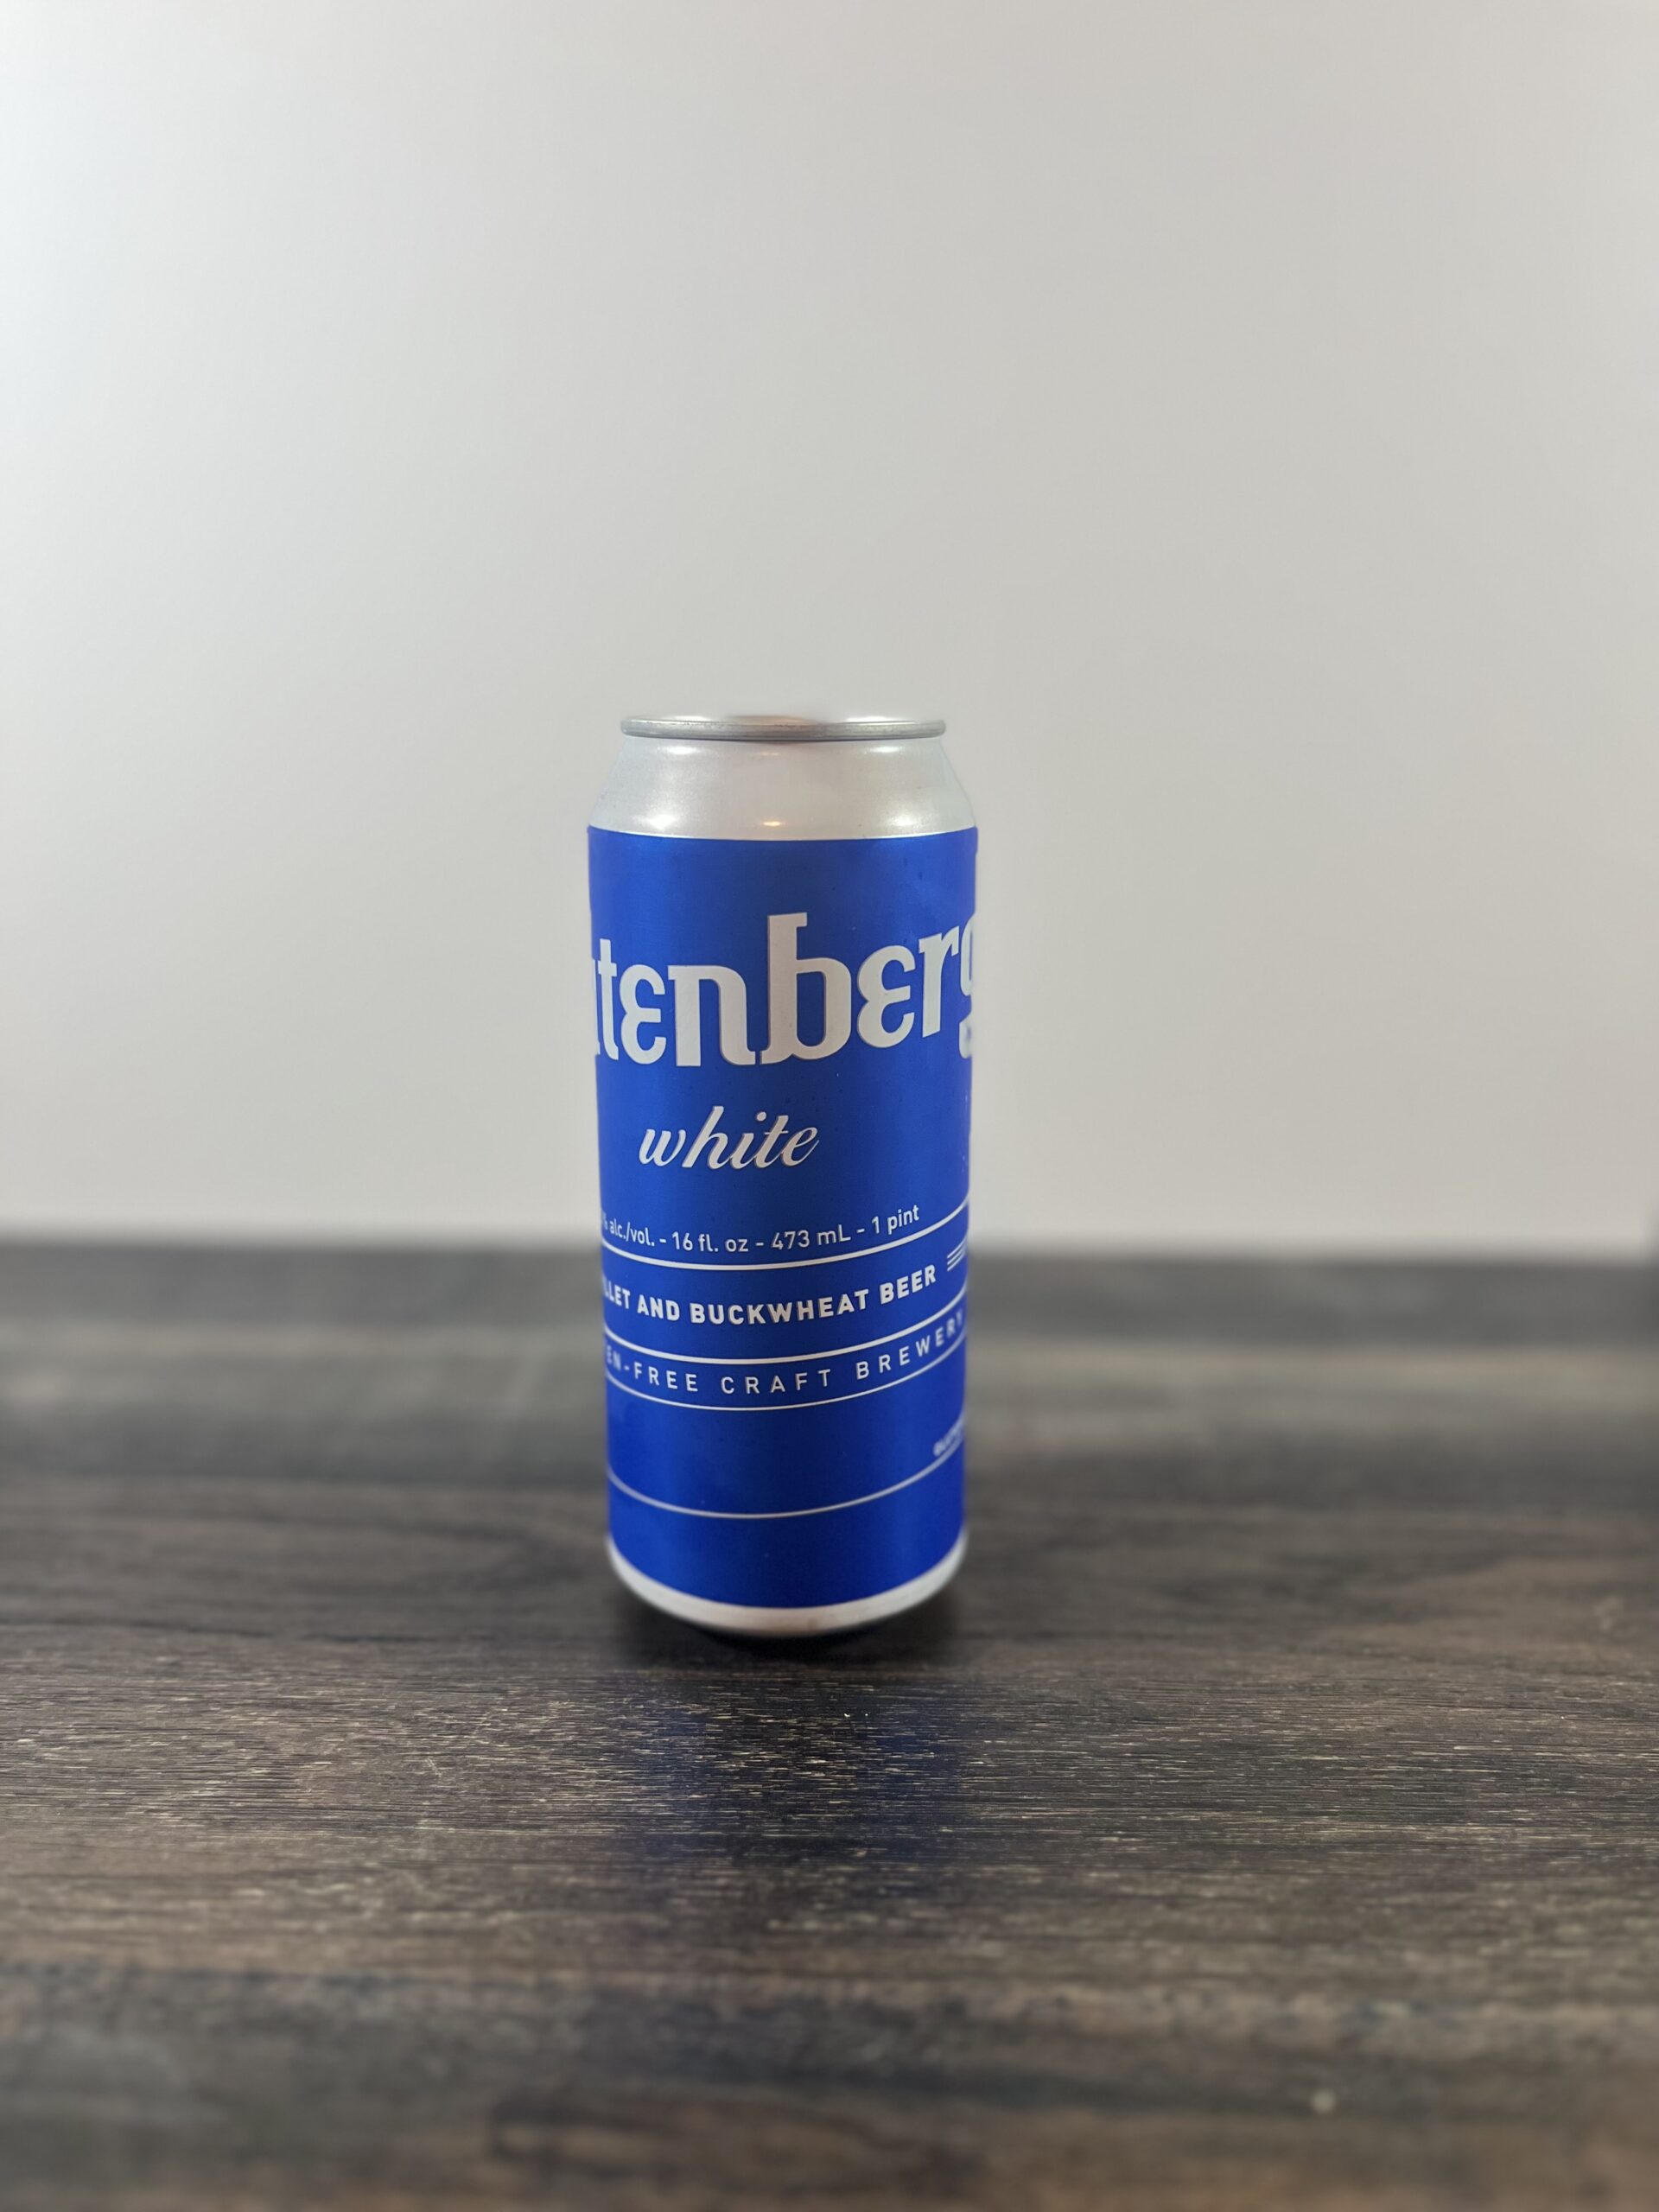 This Glutenberg white is a fruity, mild, beer with a moderate body making it just slightly filling. There is a hidden bitterness that tries to break through but is suppressed with a hint of citrus. by gfbeerlovers.com